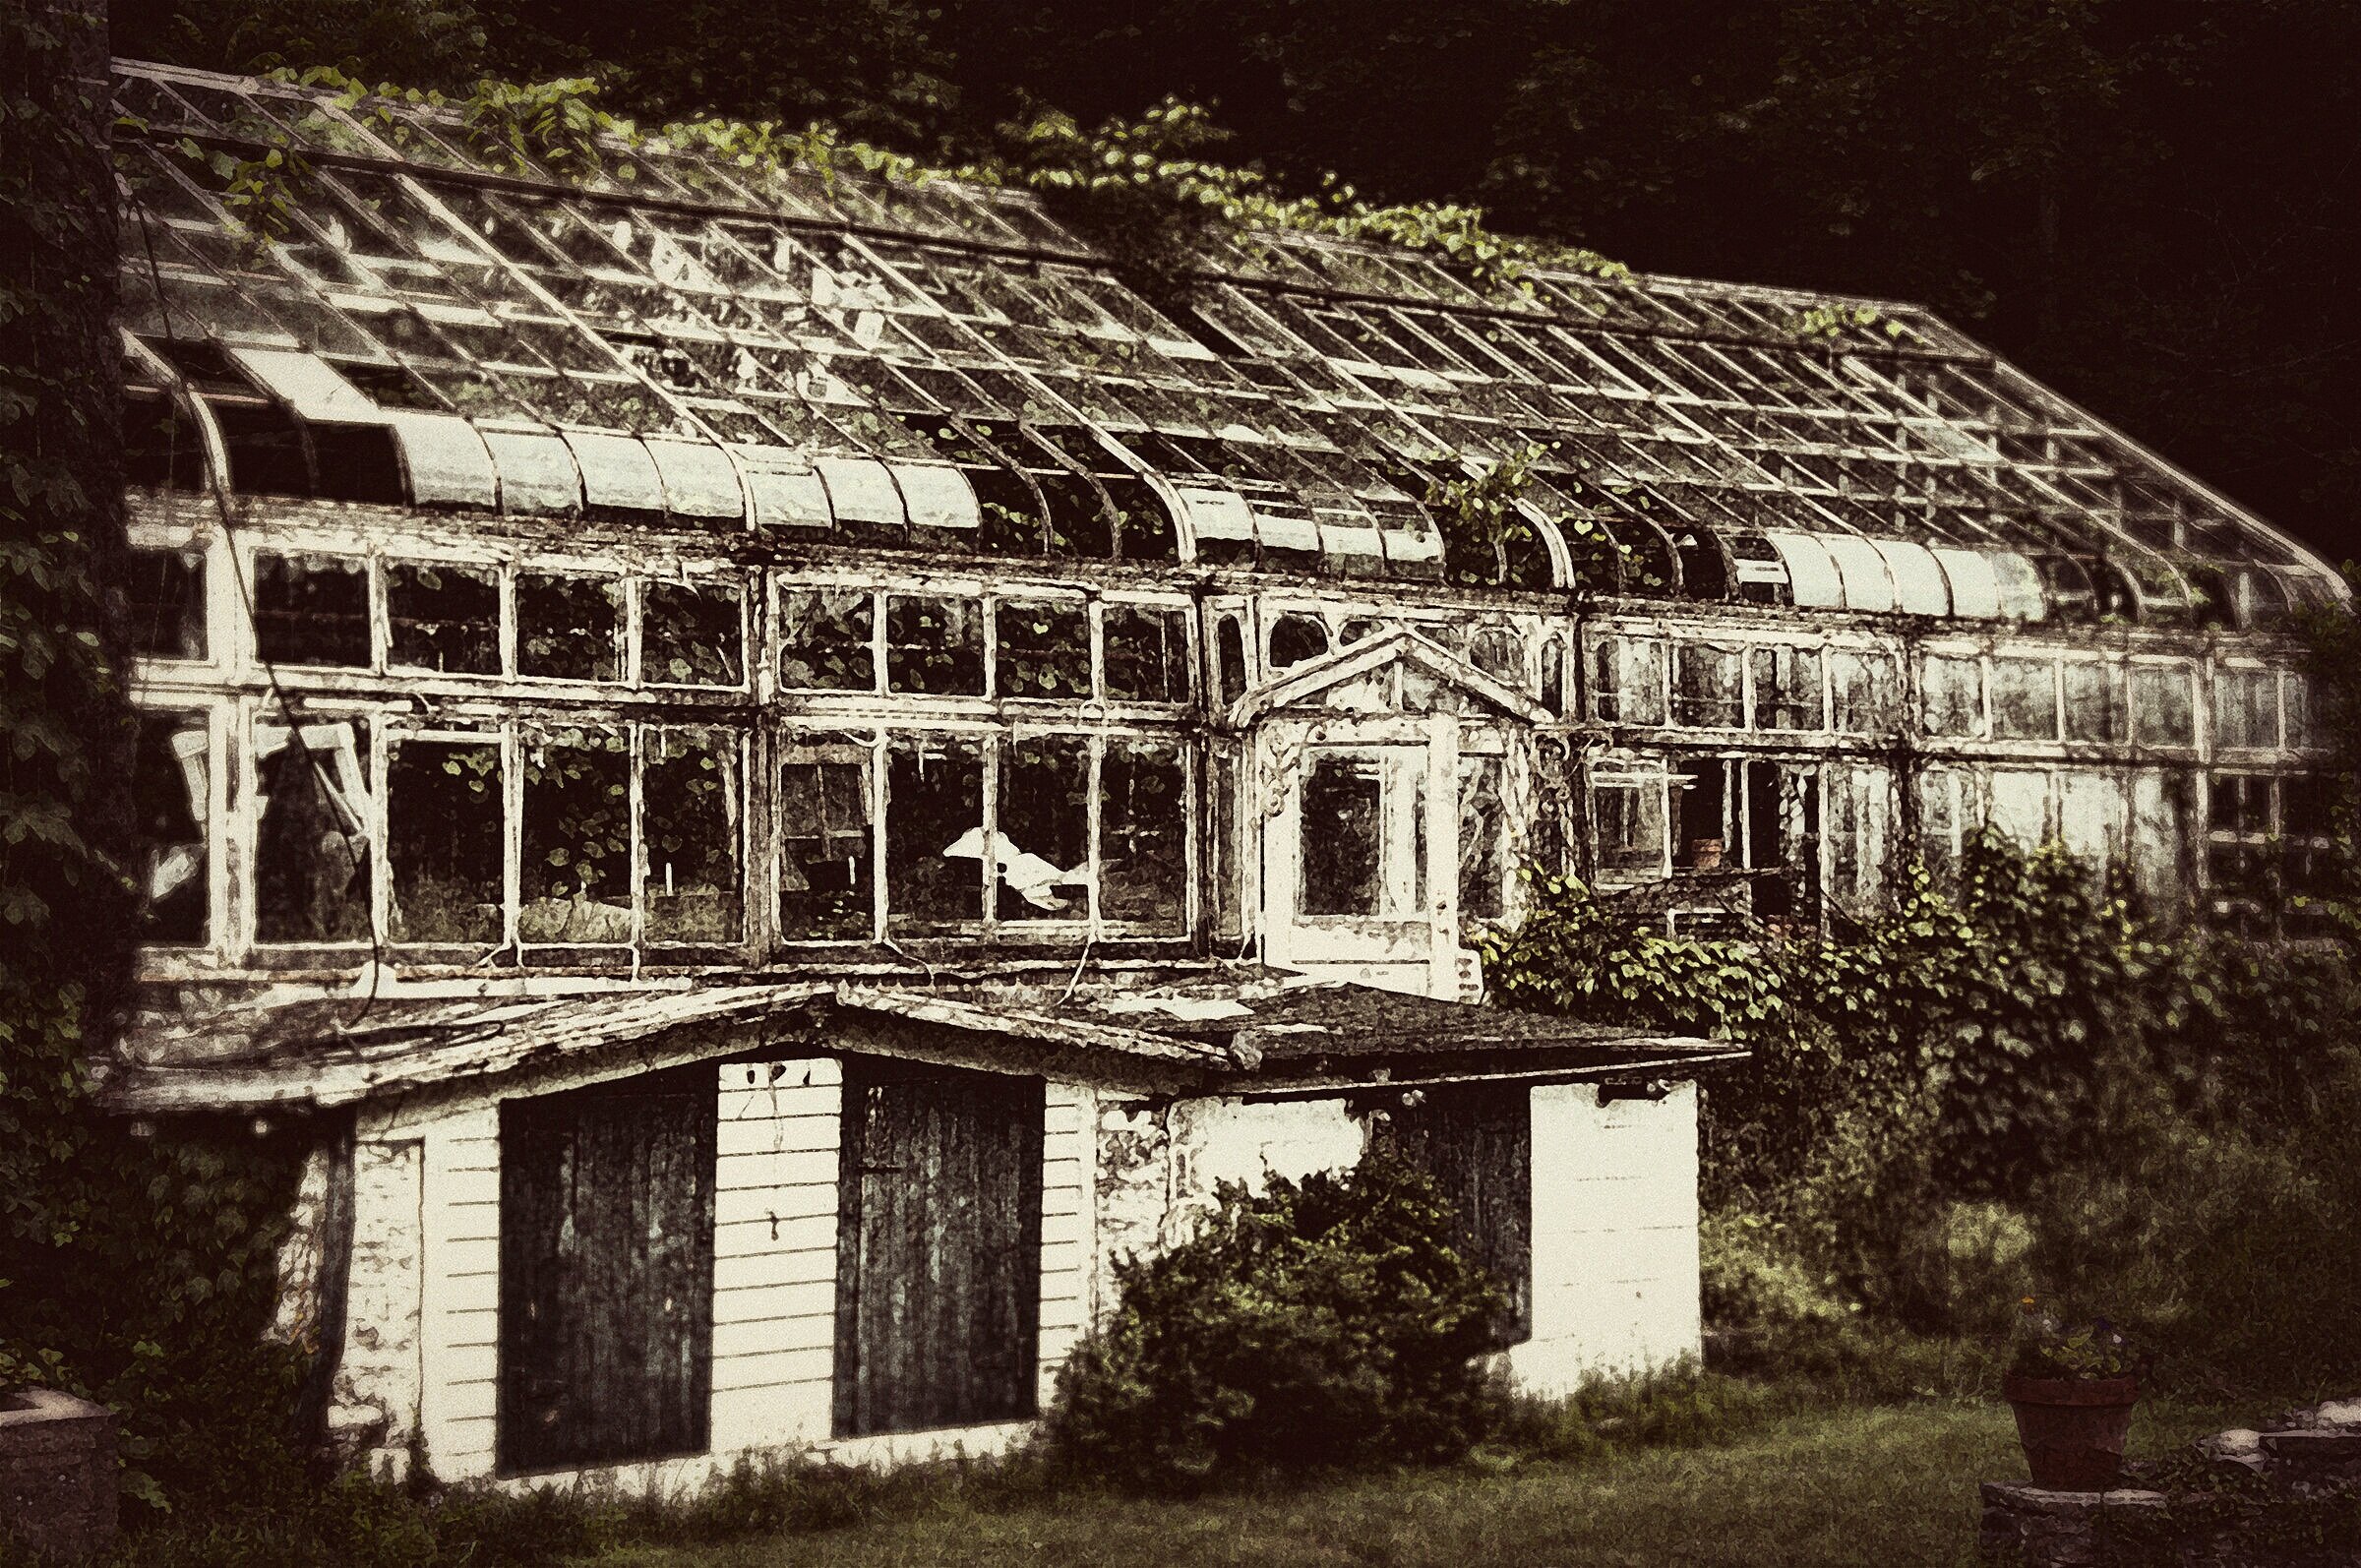 Old Greenhouse